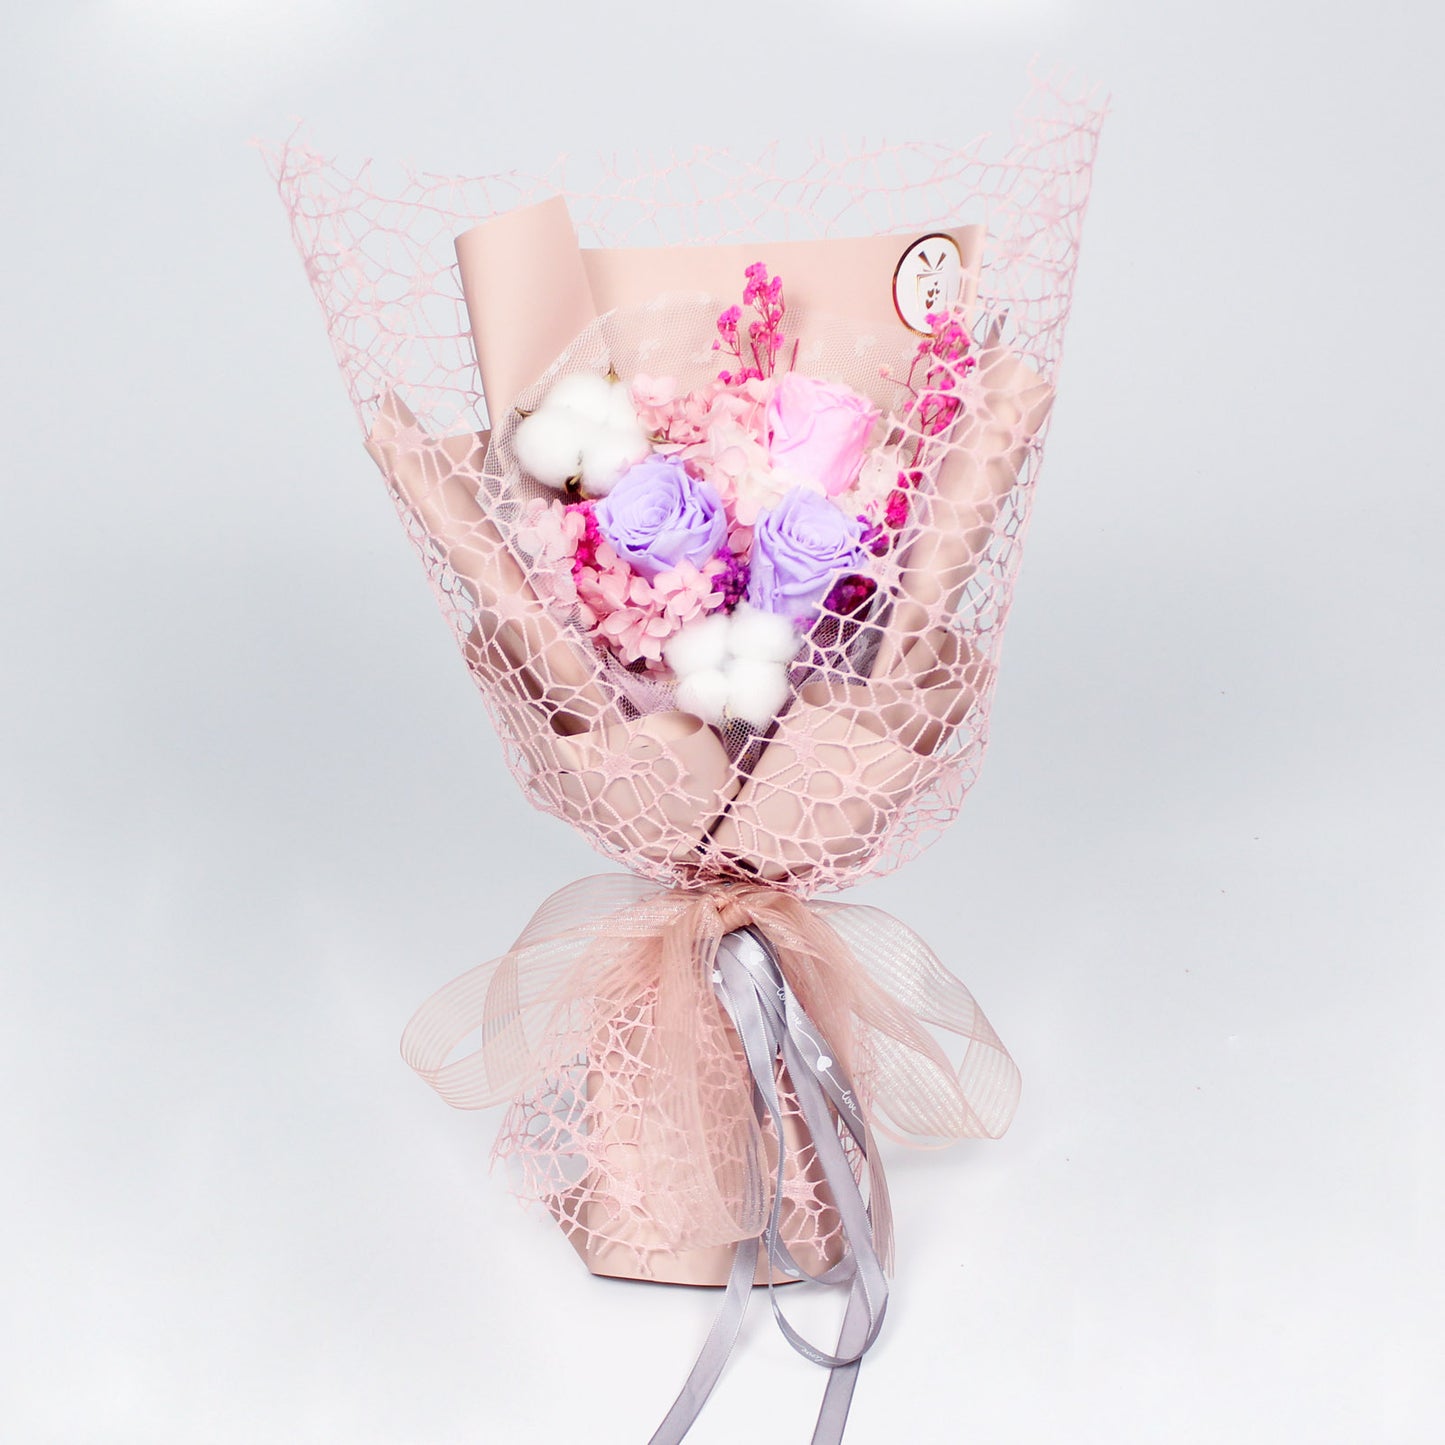 LILAC & PINK FOREVER BOUQUET | 3 ROSES